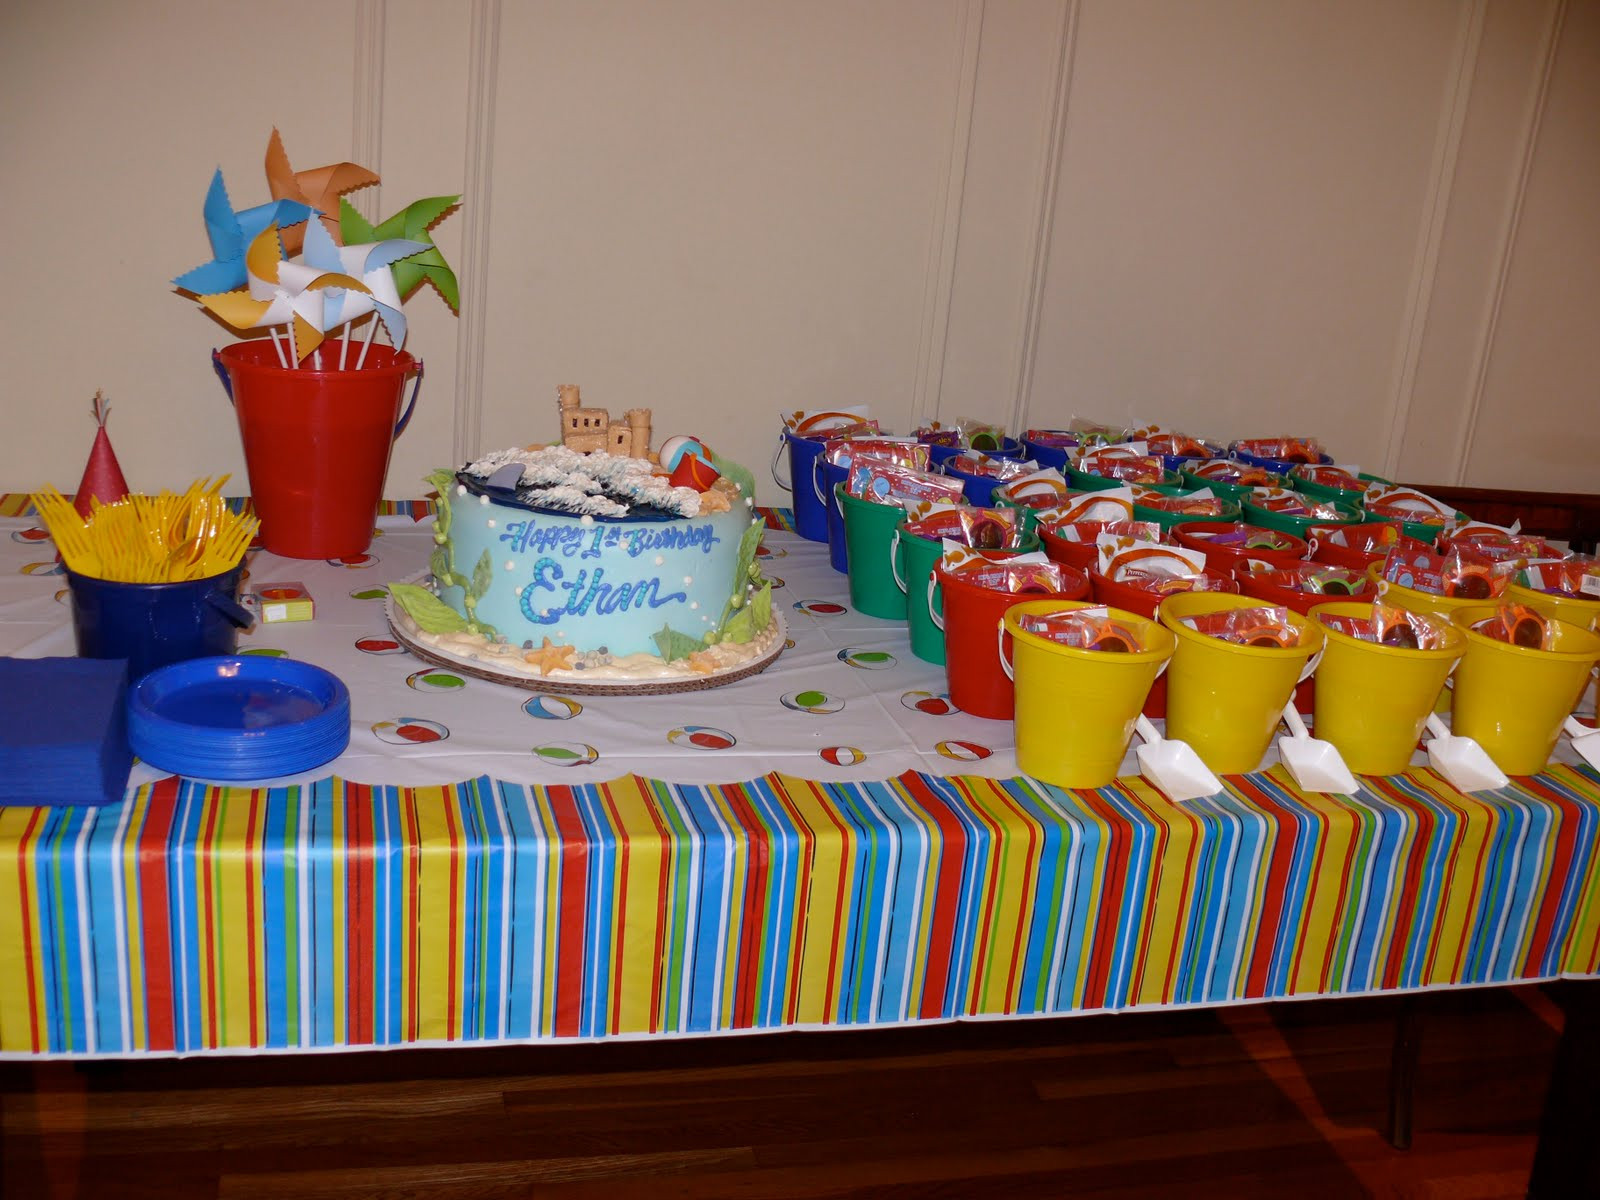 Beach Bday Party Ideas
 Stylish Childrens Parties Beach First Birthday Party